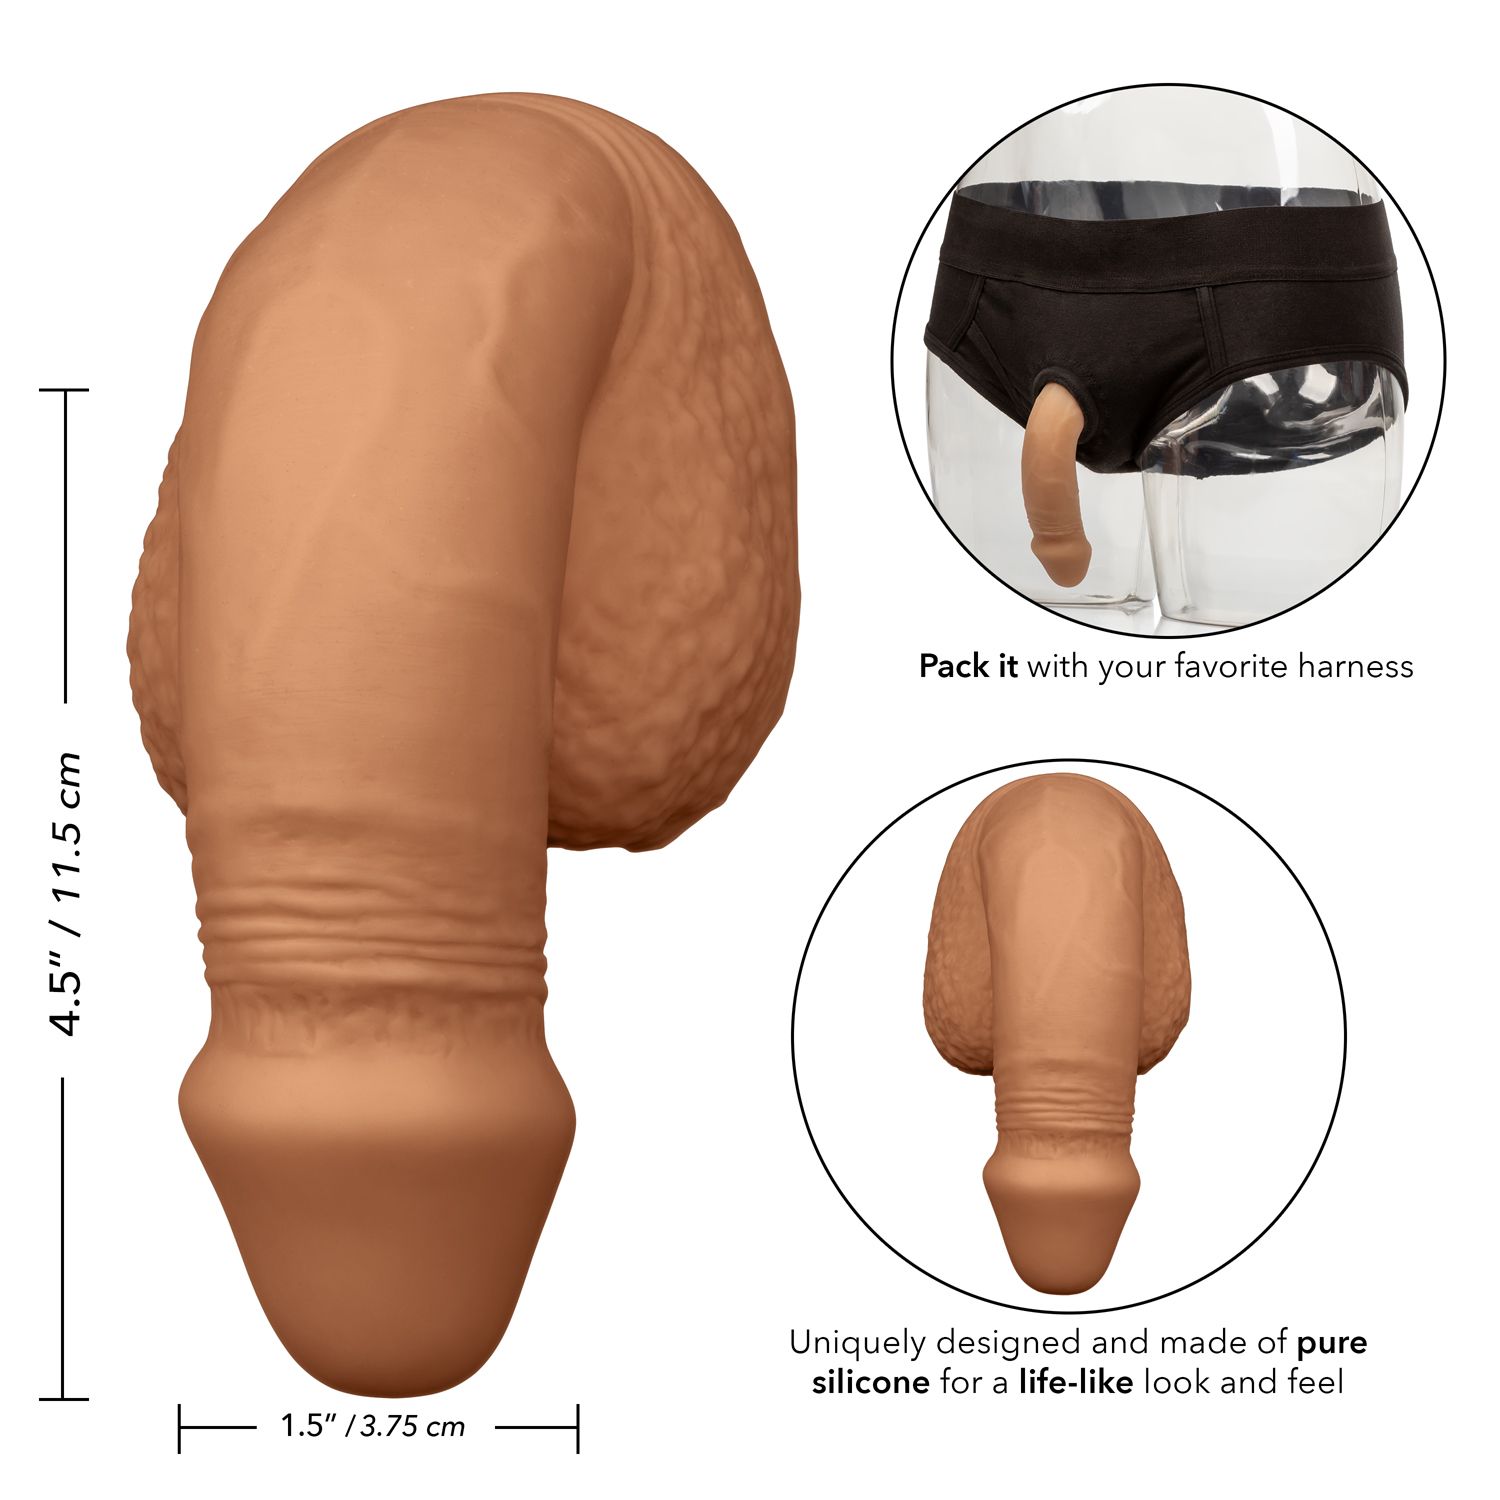 PACKER GEAR 5IN SILICONE PENIS TAN - SE158125